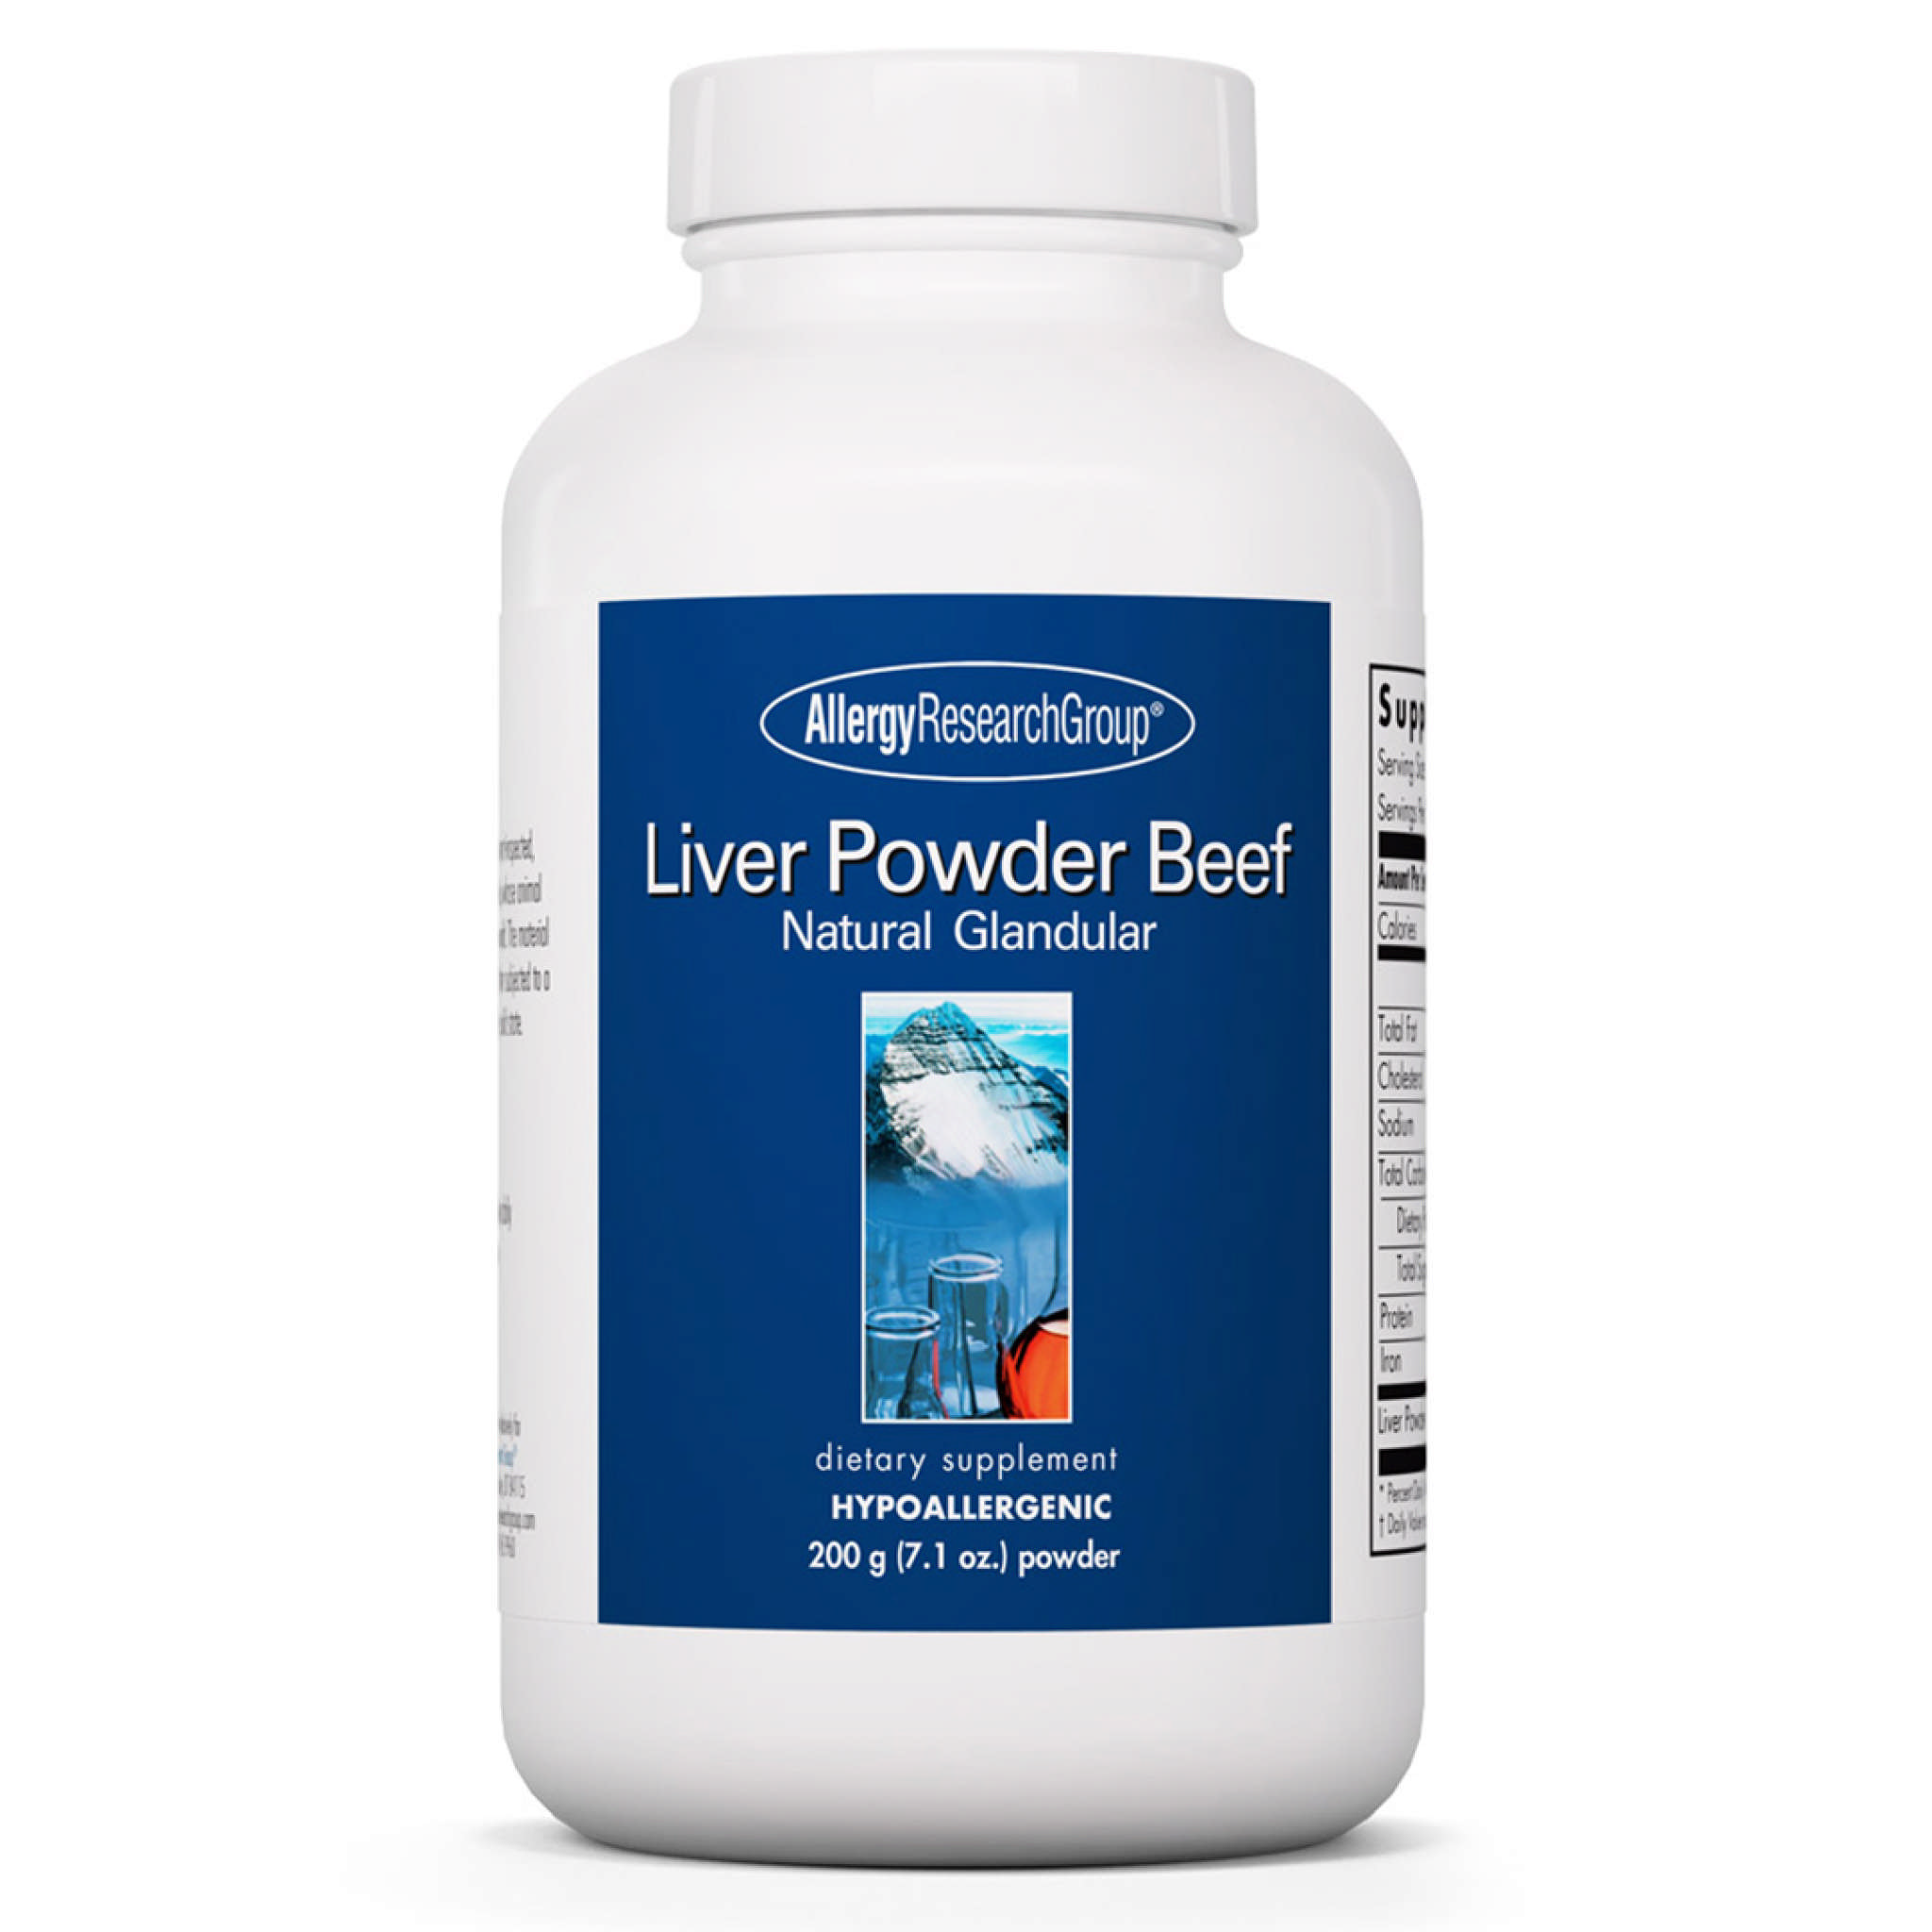 Allergy Research Group - Liver Powder Beef